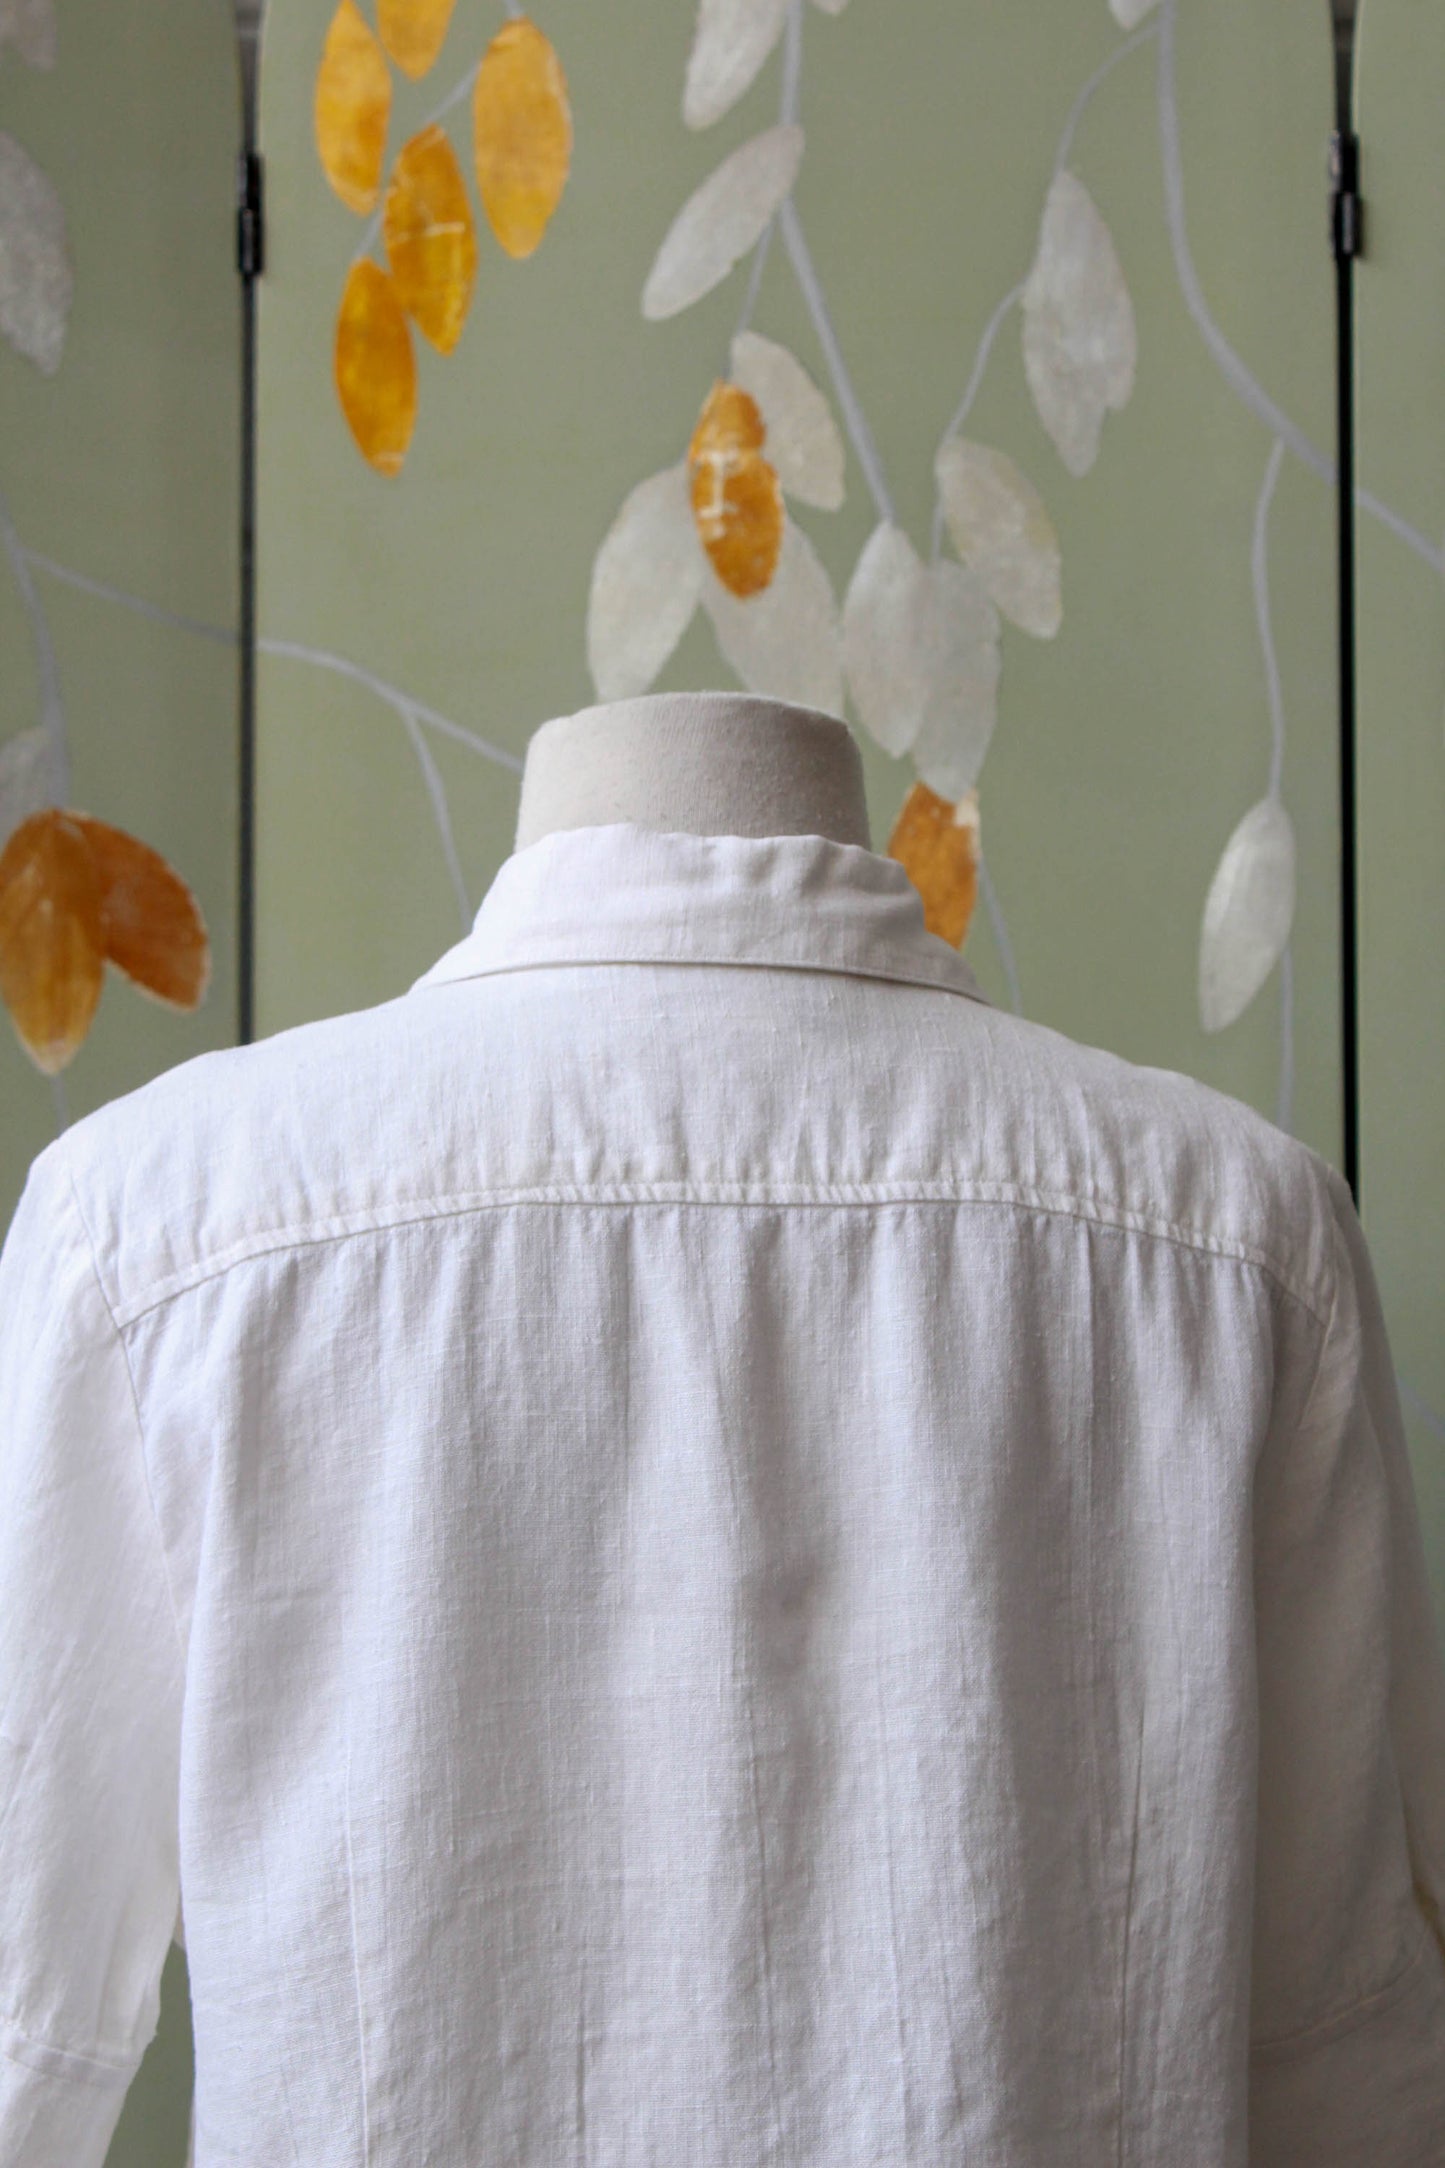 Vintage Plain White Linen Button Up Collared Blouse with Short Sleeves and buttoned cuffs by the Room